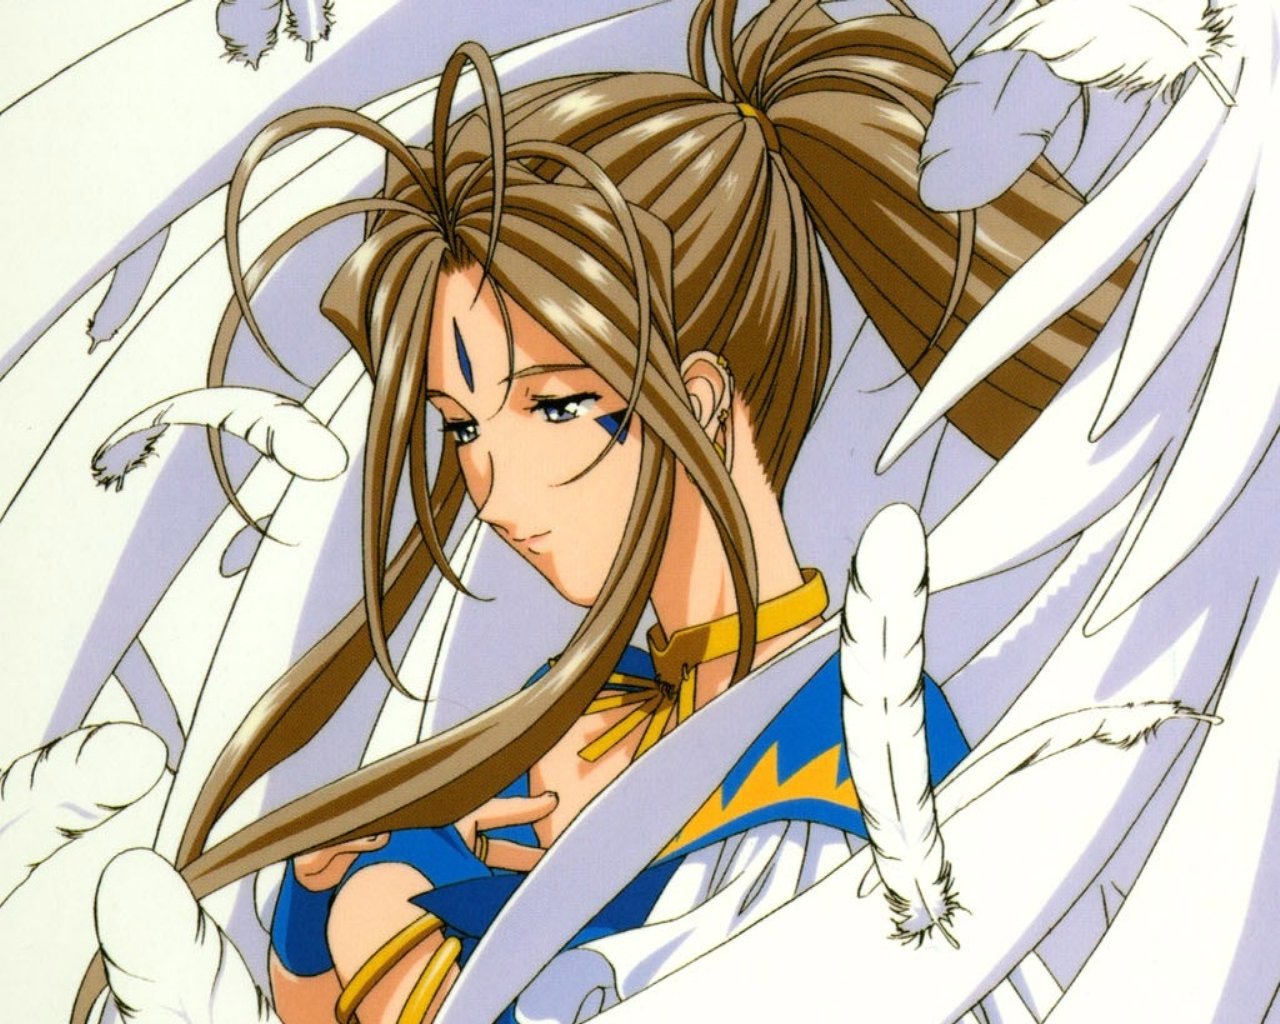 Amazon.com: Anime Ah My Goddess Belldandy Canvas Art Poster Family Bedroom  Posters Gifts 20x30inch(50x75cm): Posters & Prints